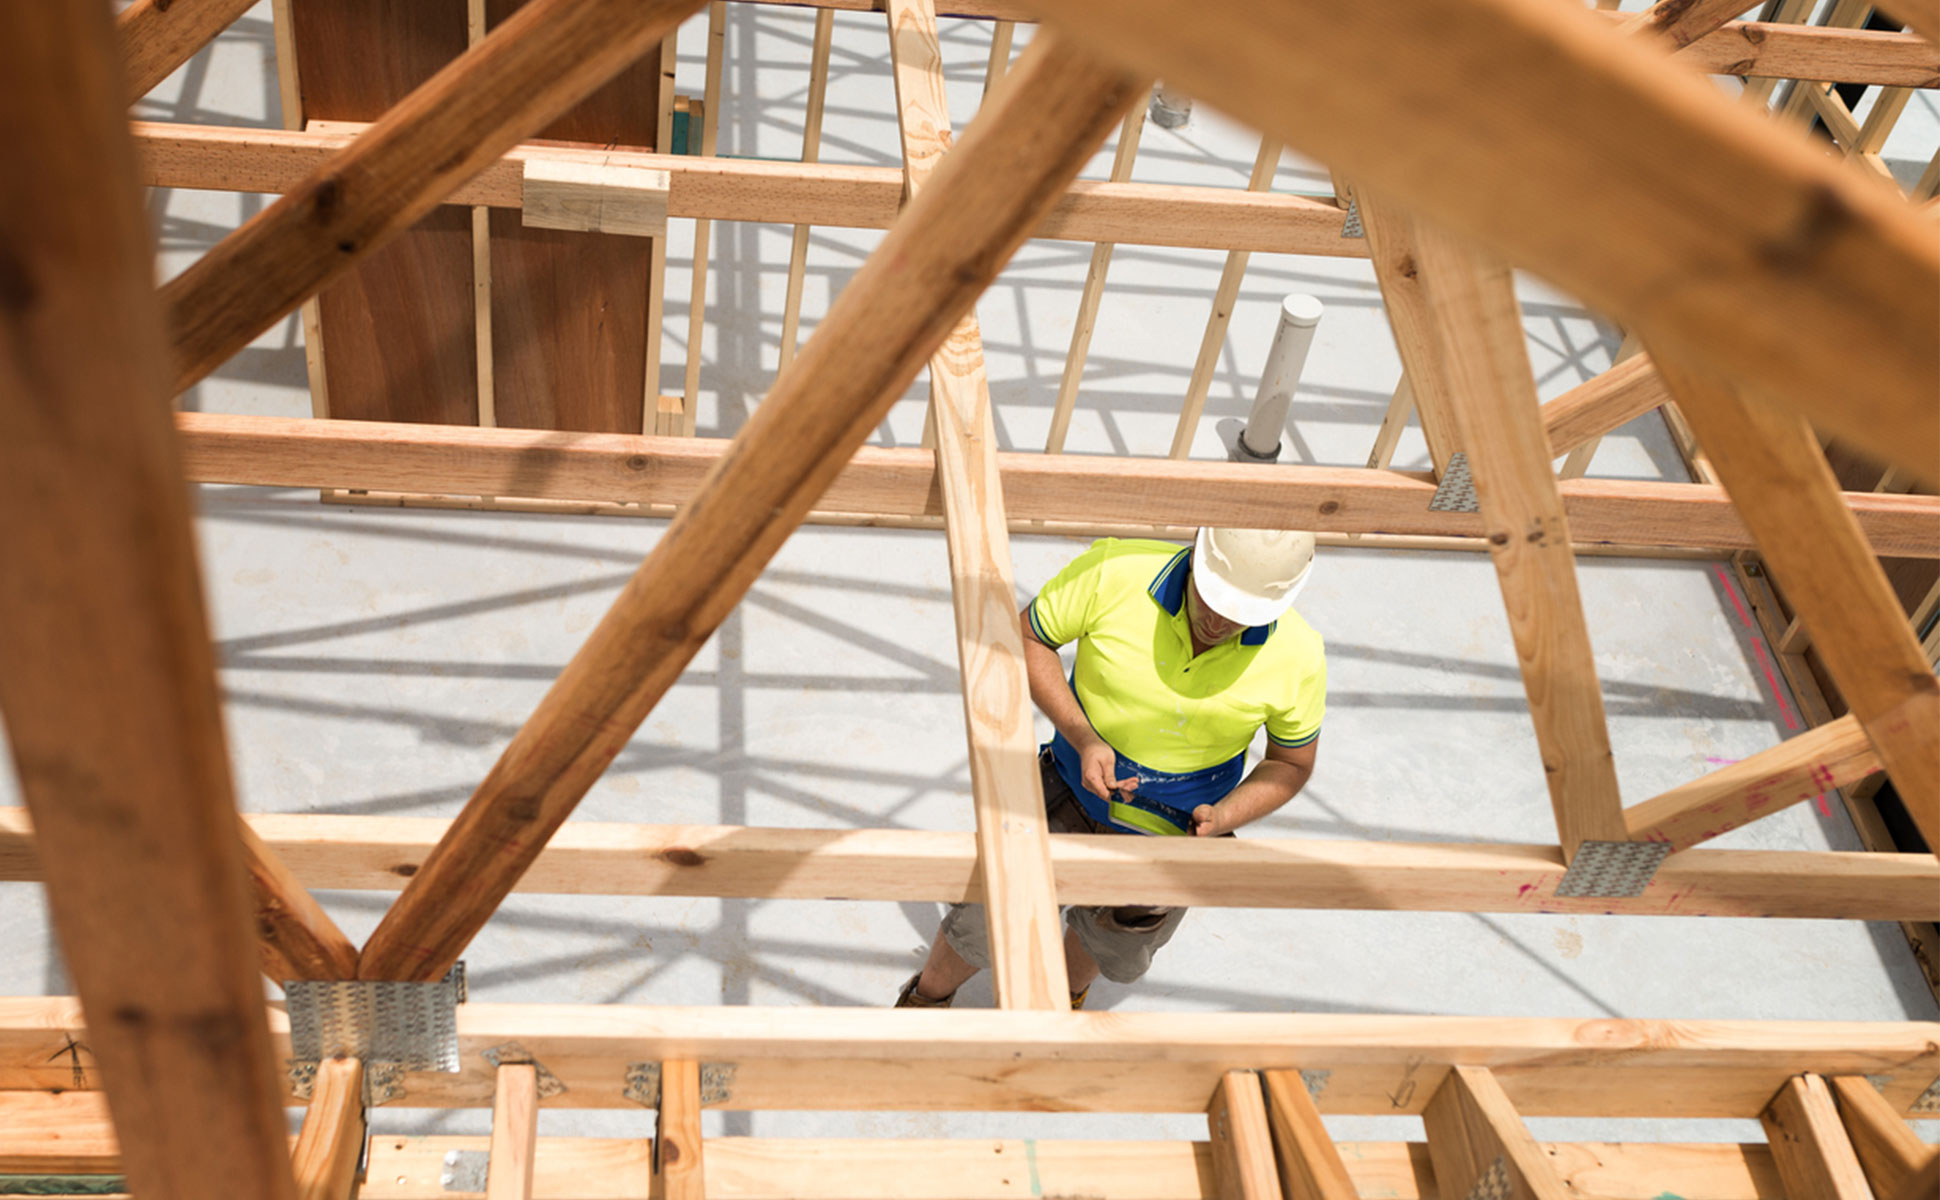 ▲ HomeBuilder stimulus and first-home incentives has fuelled positive property market sentiment.